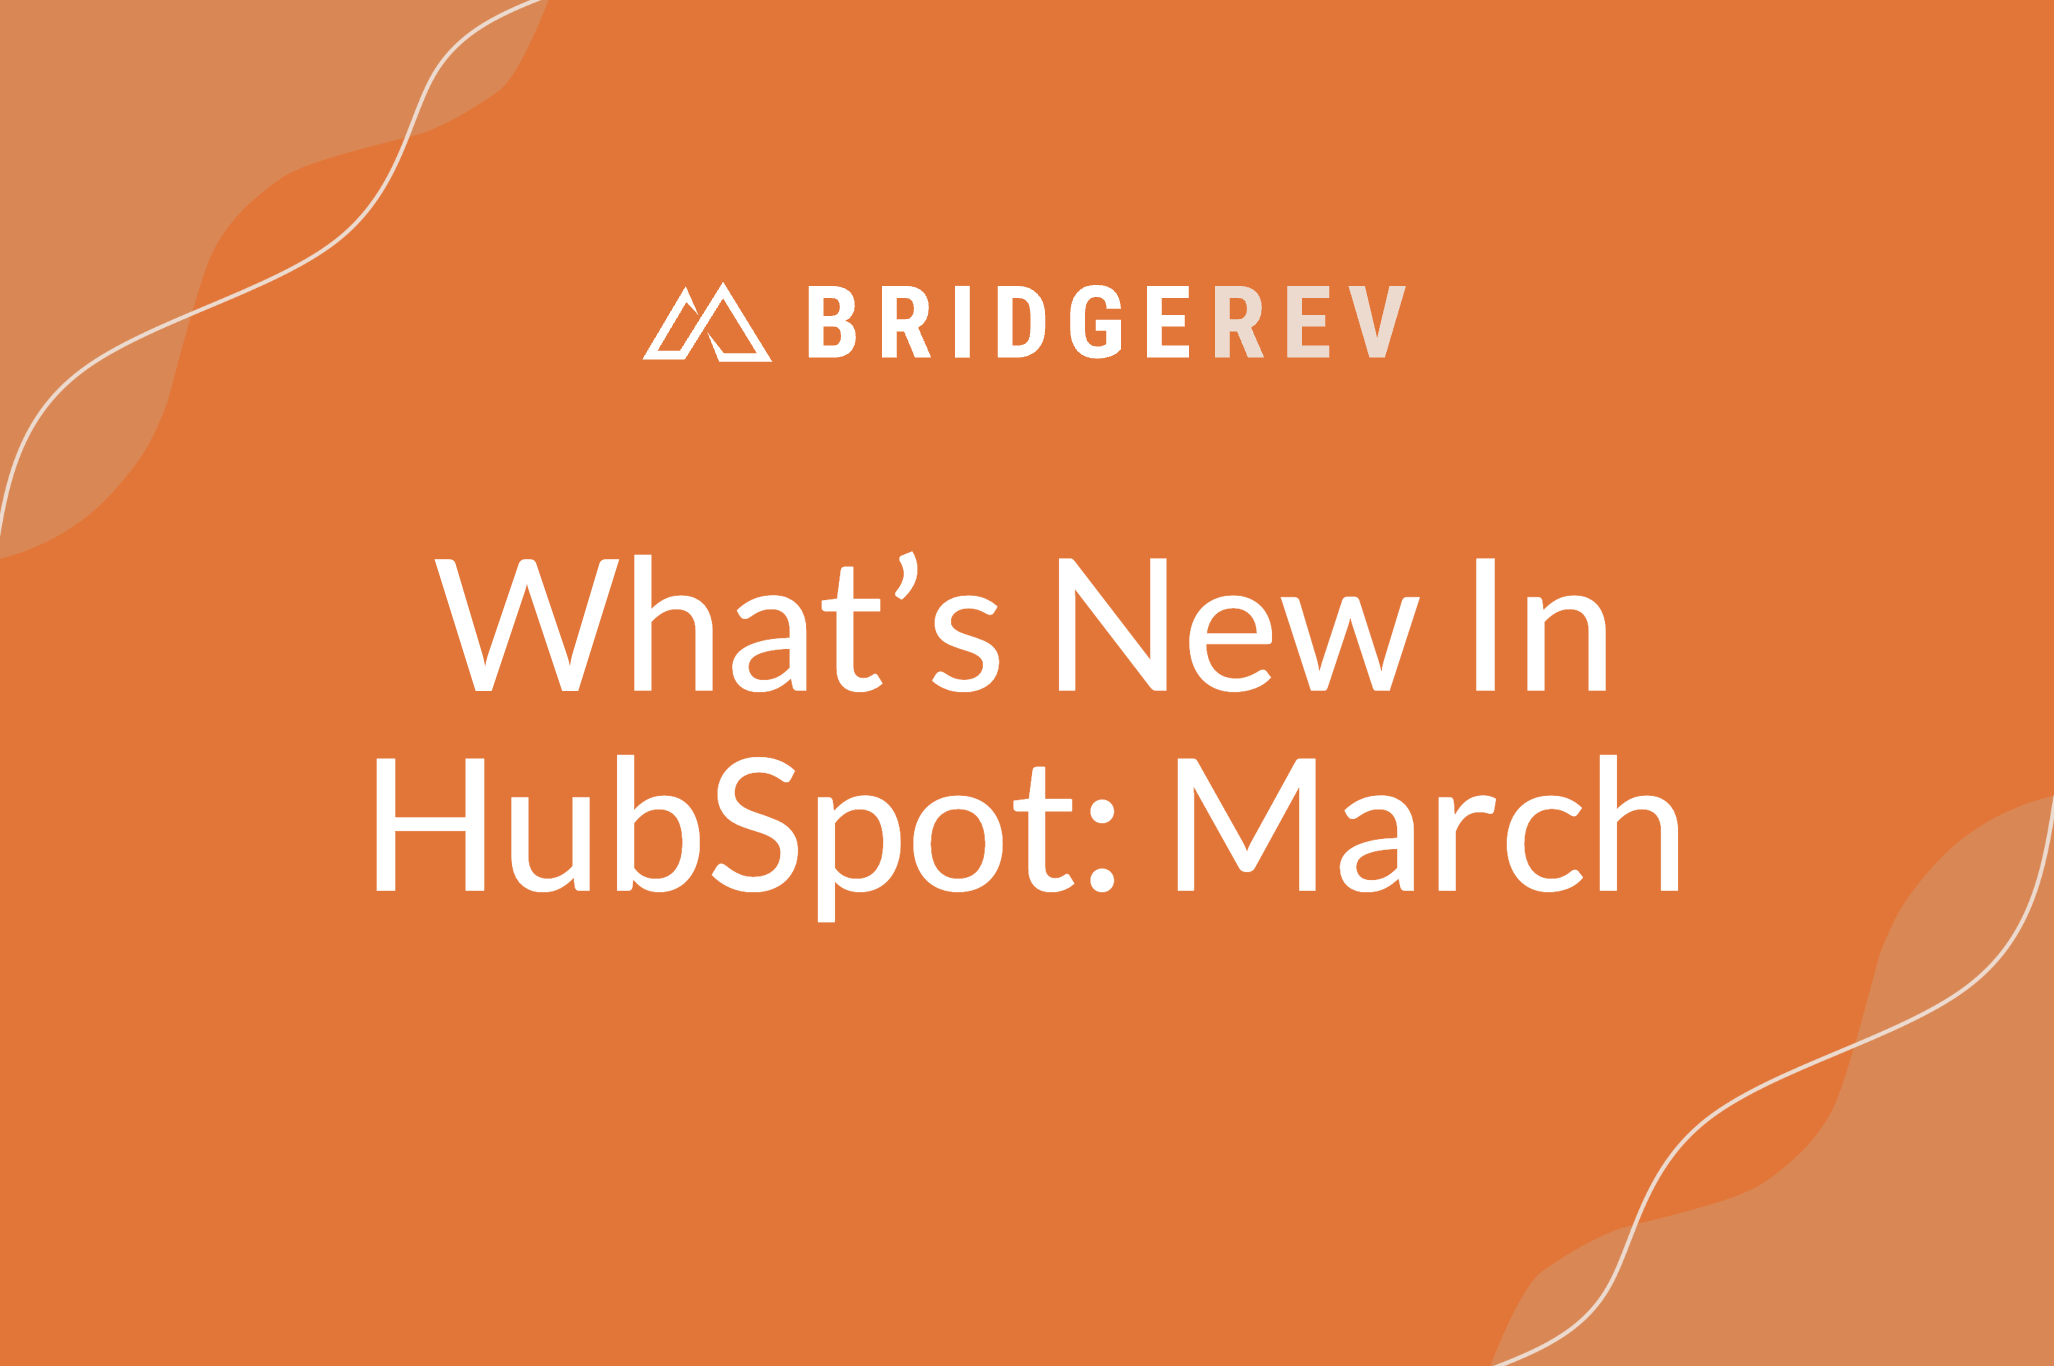 What's New In HubSpot - March